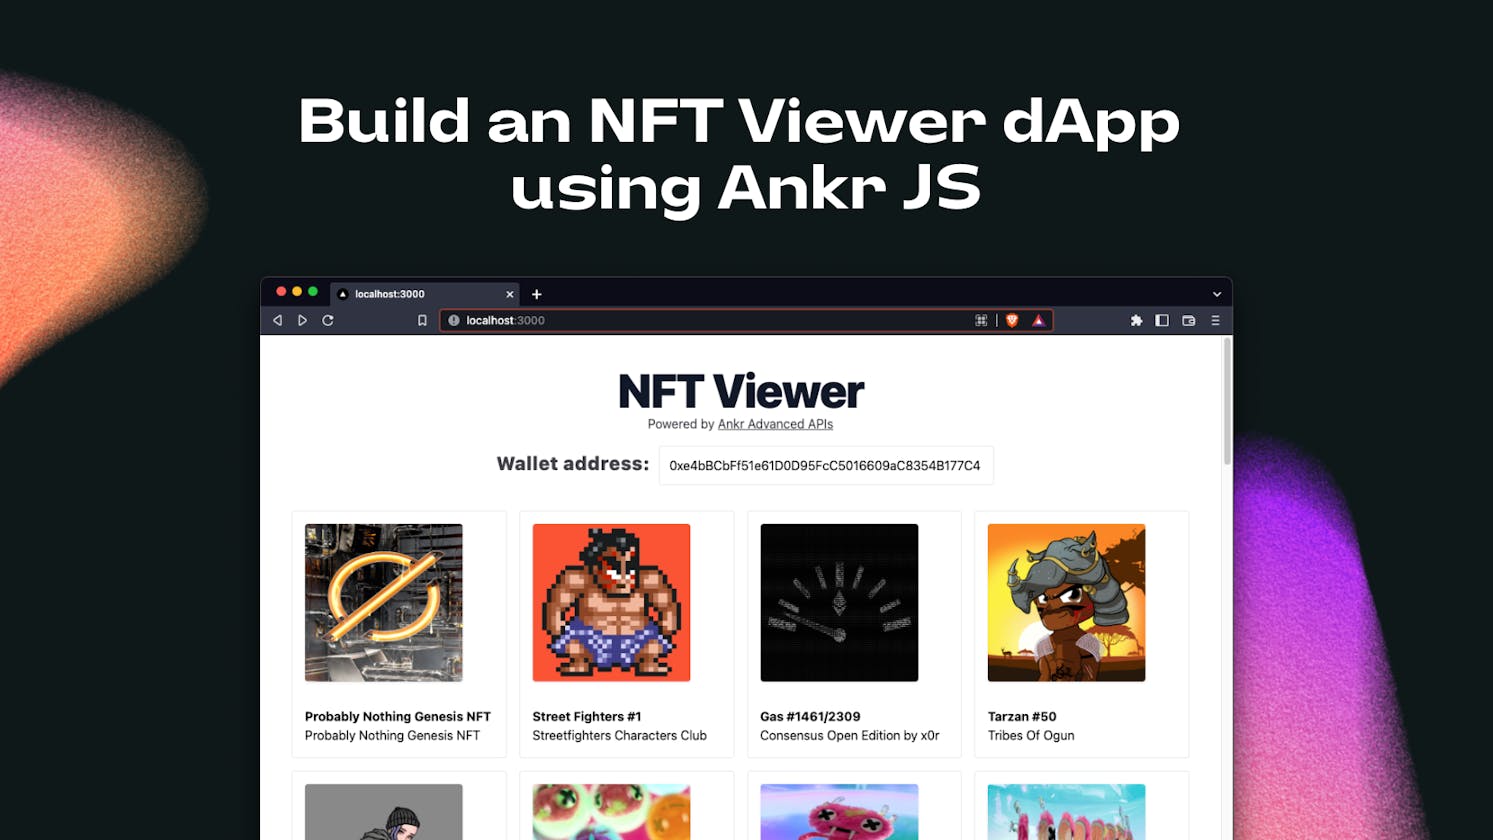 How to Build an NFT Viewer dApp using Ankr.js to fetch NFTs owned by the Wallet Address